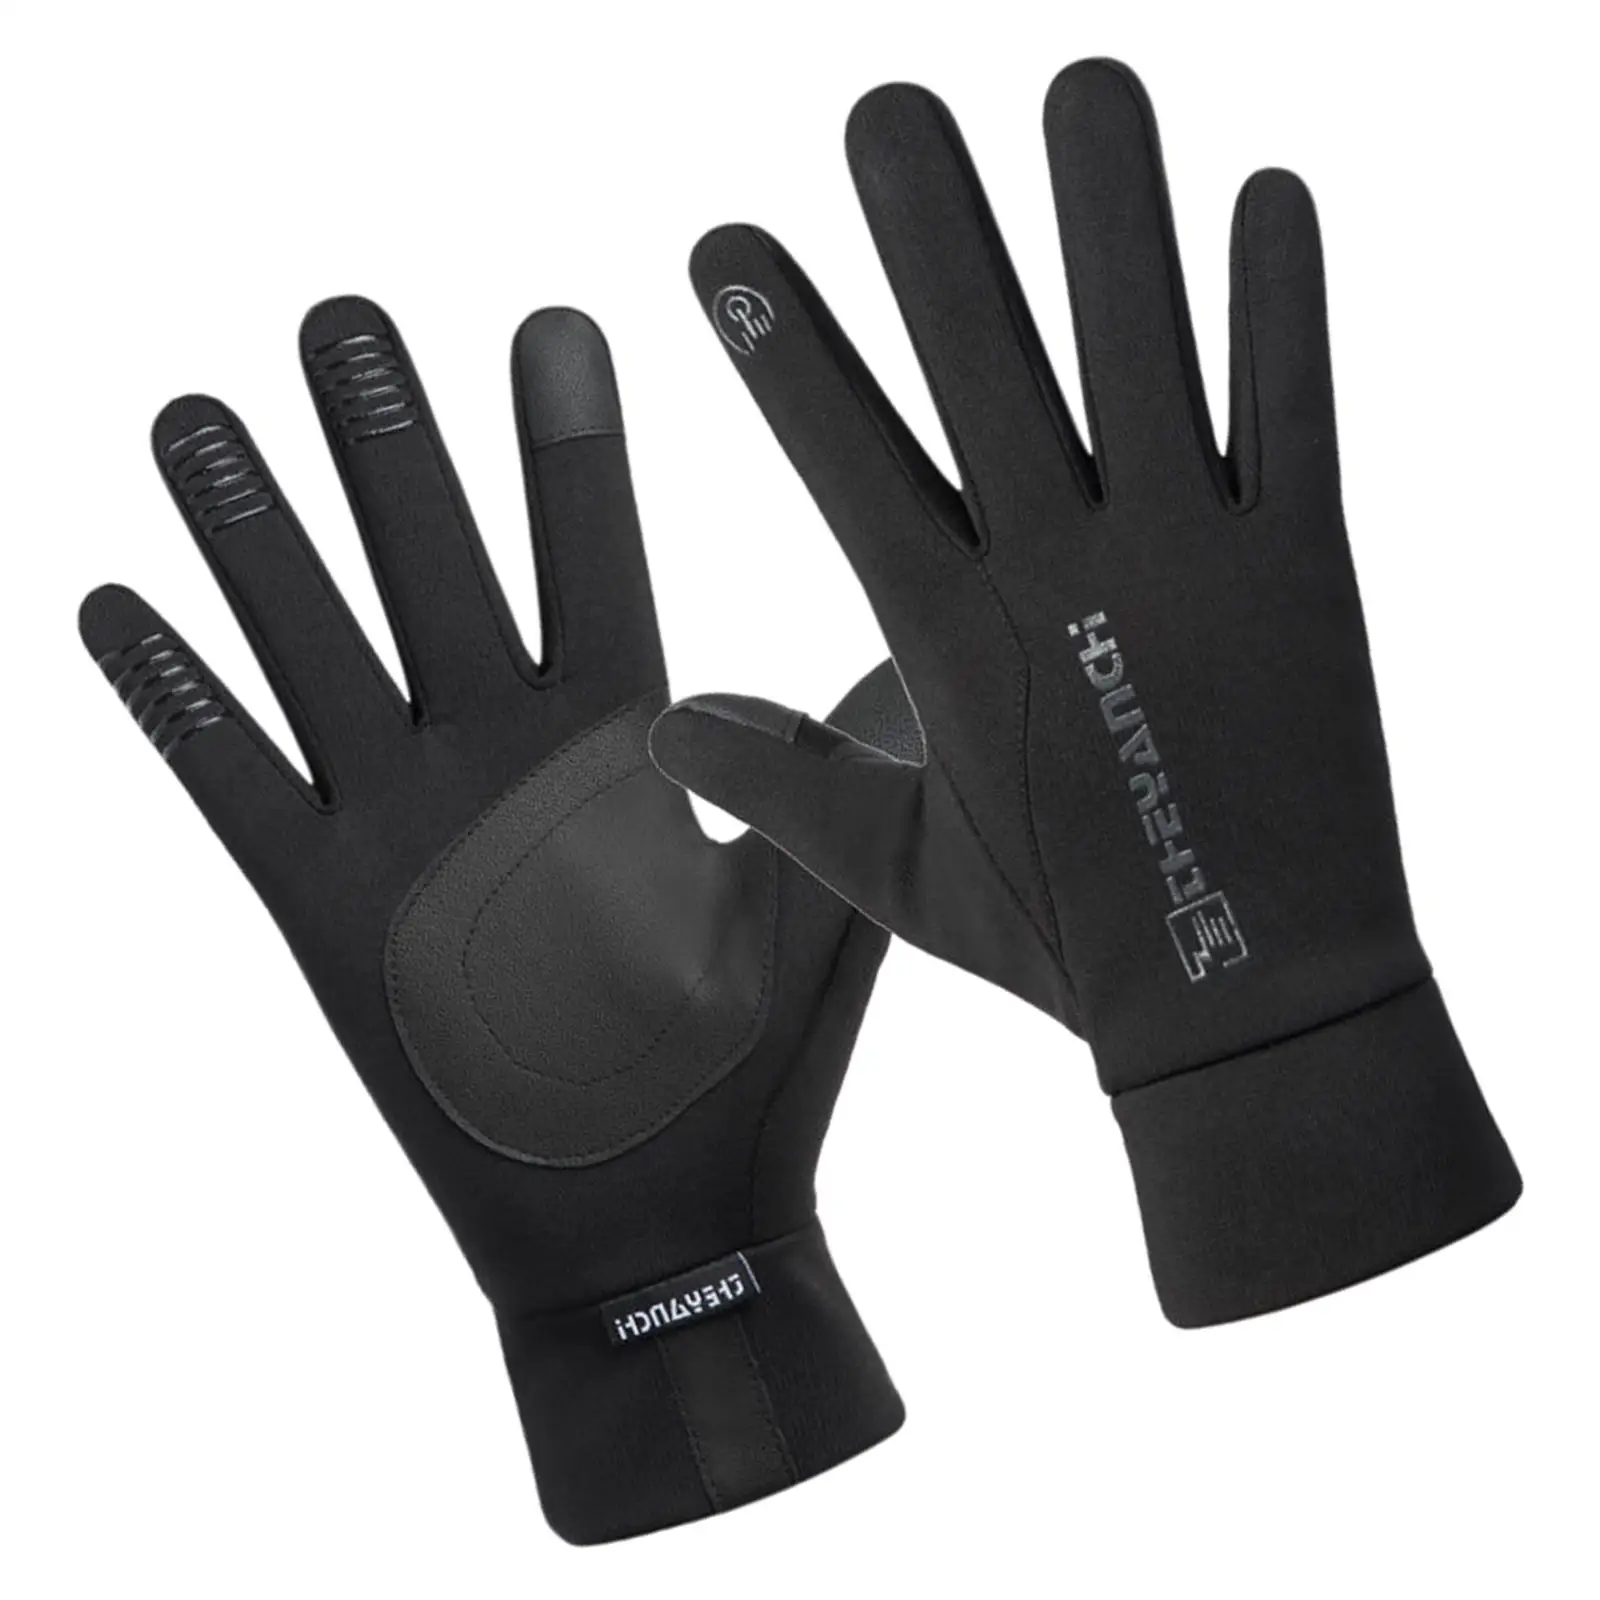 Heated Gloves Non- Touch Screen Waterproof Warm Full Finger Shock Absorber Windproof for Climbing Skiing Outdoor